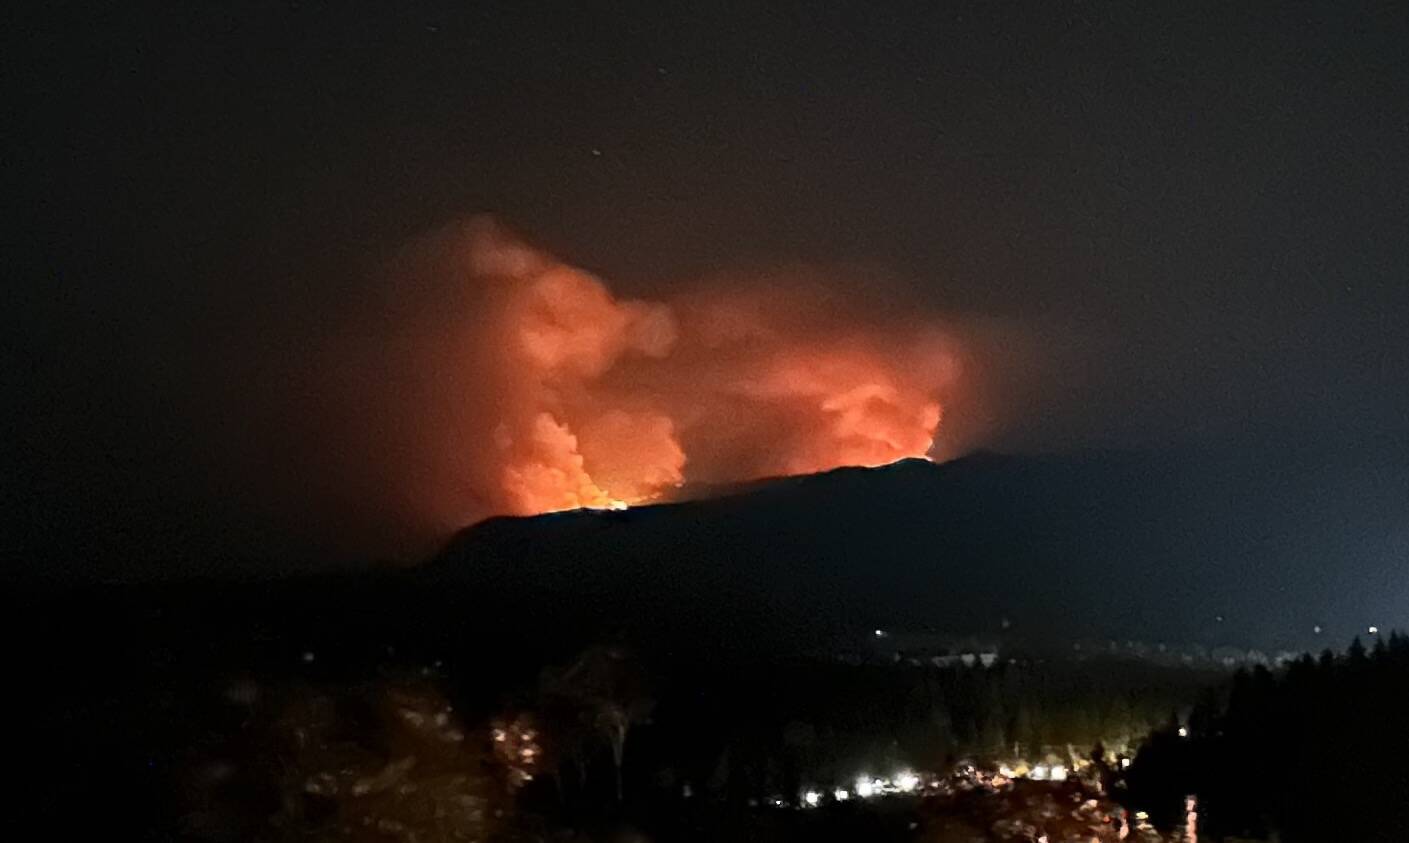 Officials: Wildfire visible from Snoqualmie Ridge poses no threat to Valley.